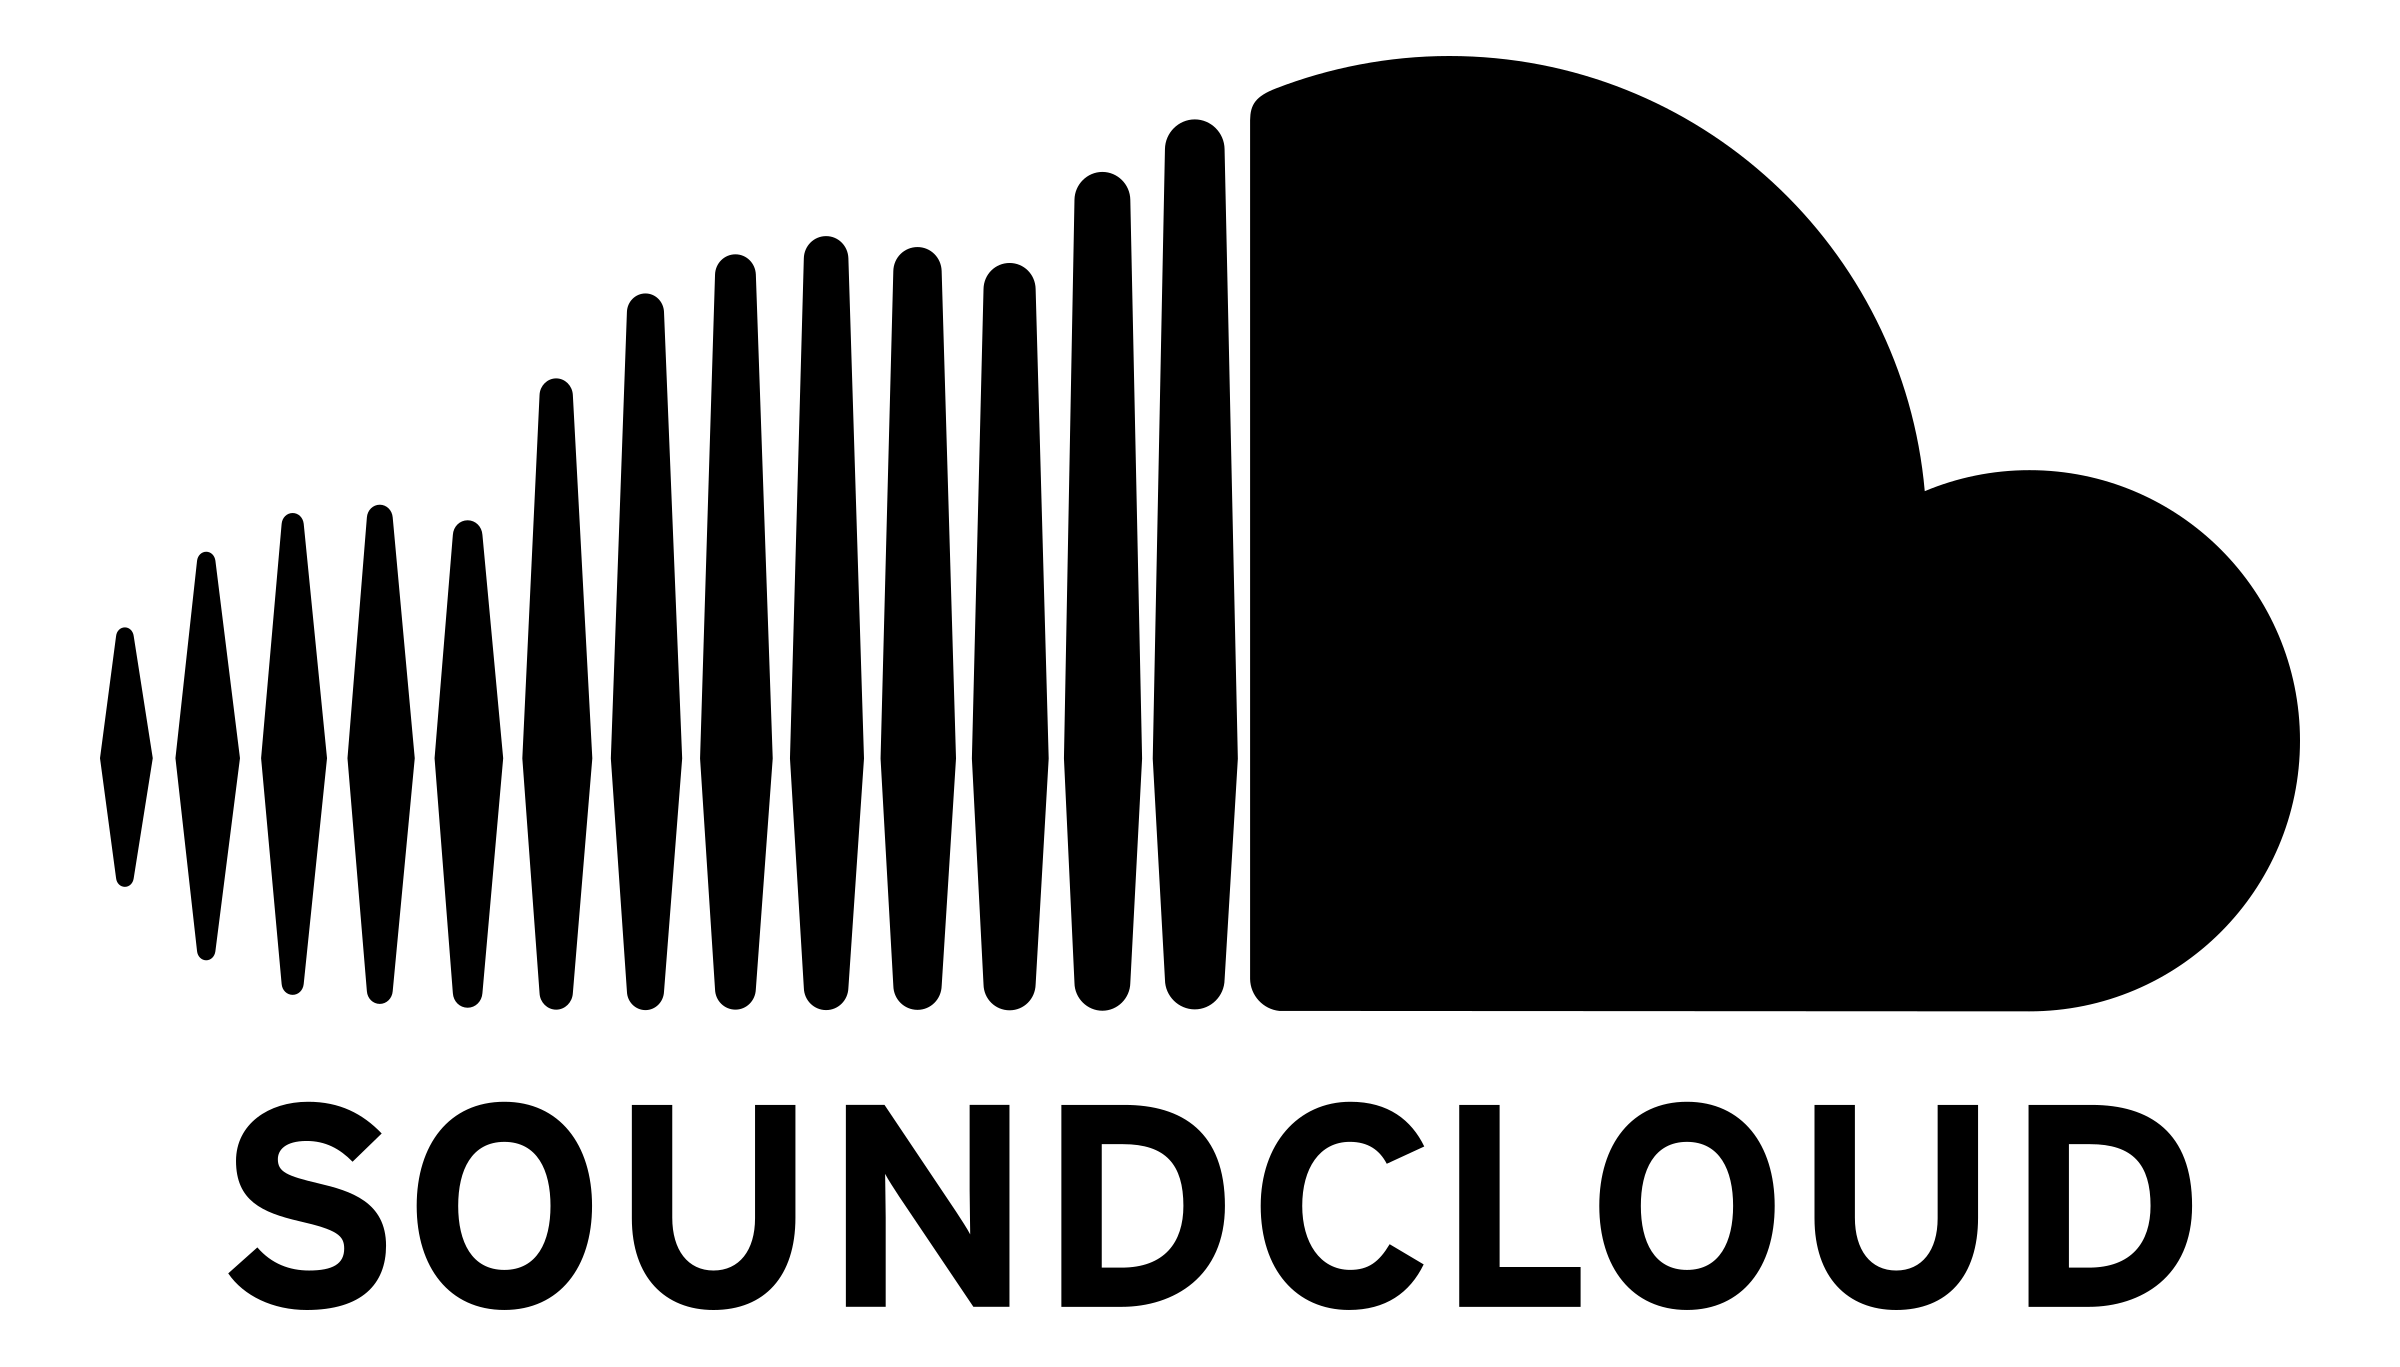 Black SoundCloud Logo - Black Soundcloud Logo Png Images